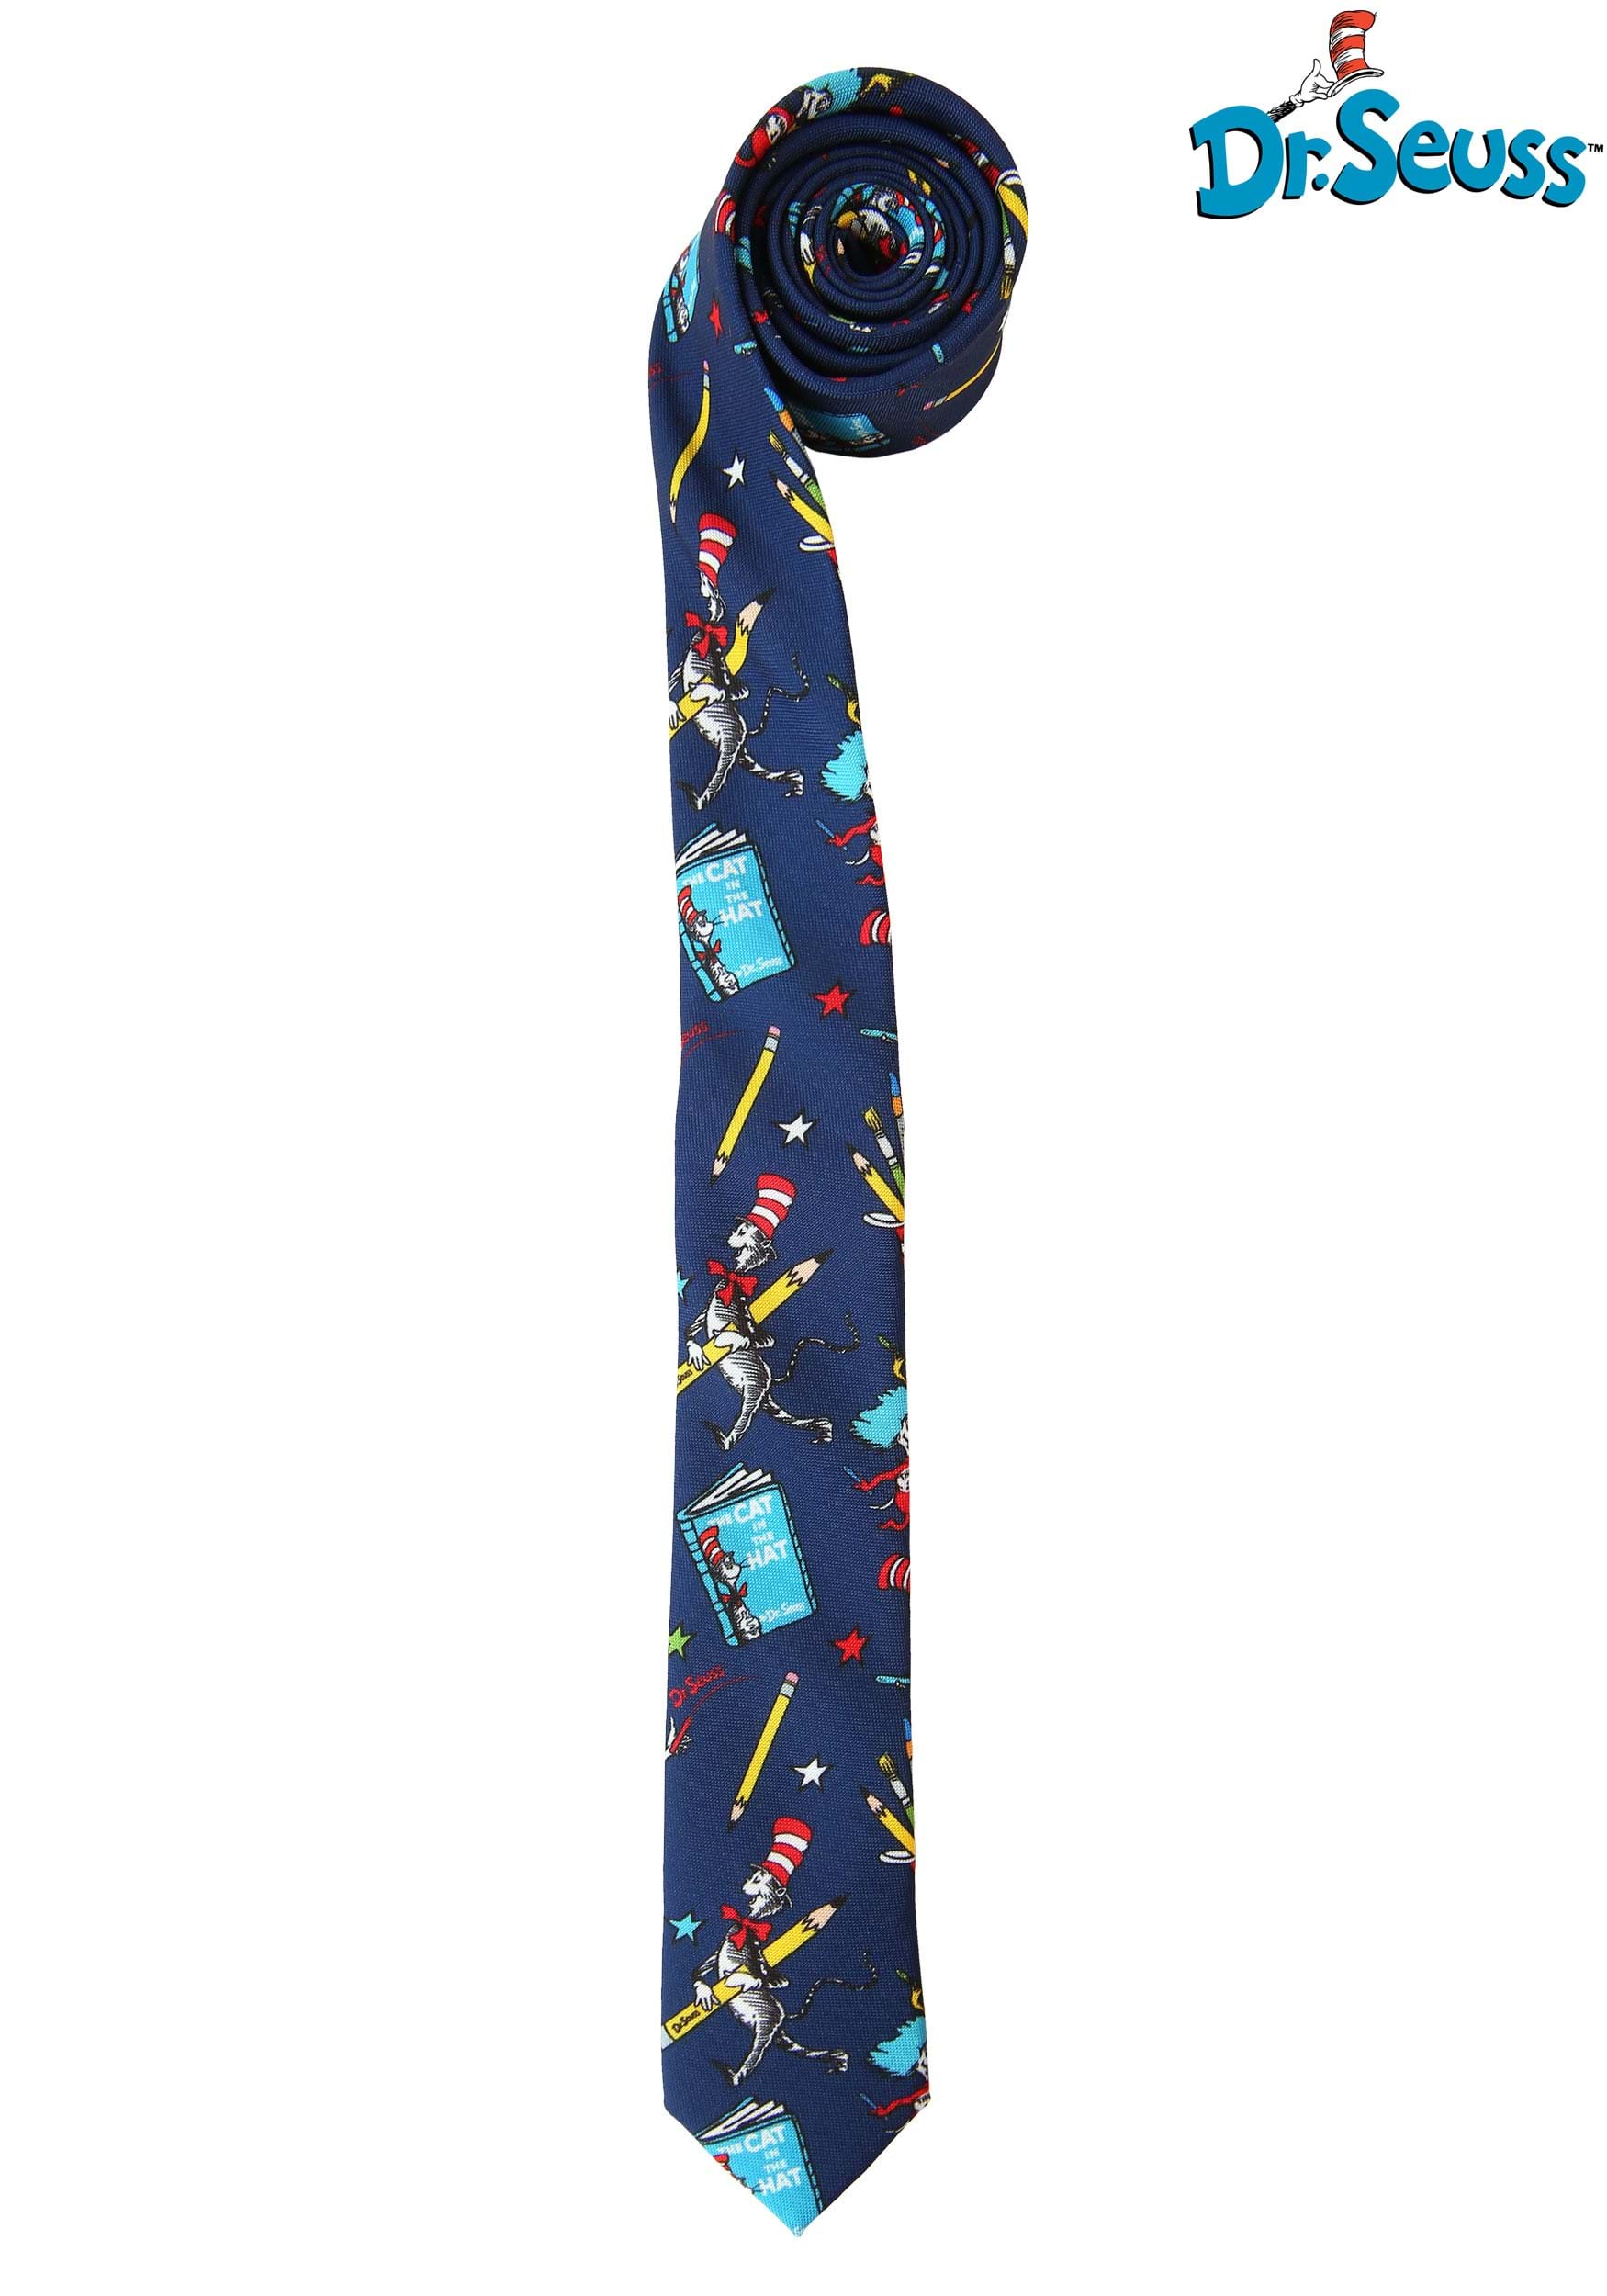 Dr. Seuss Reading Pattern Necktie for Adults